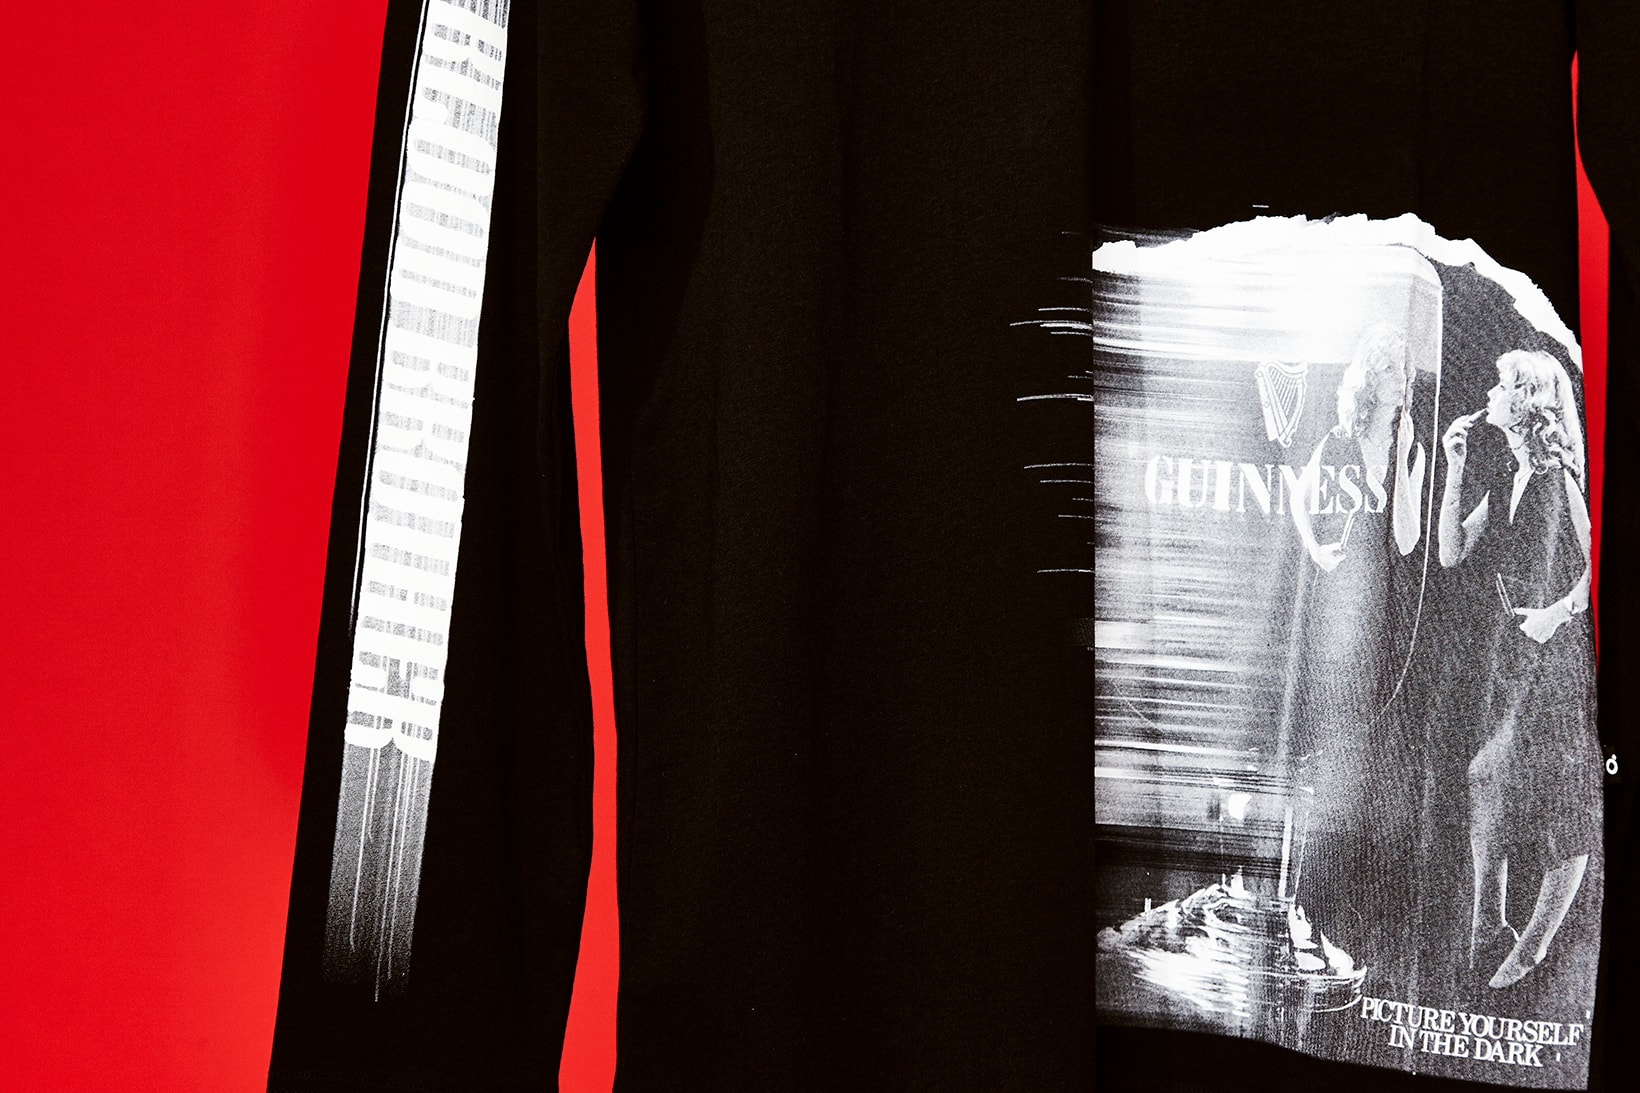 Blood Brother x Guinness 'Time for Reflection' Collection